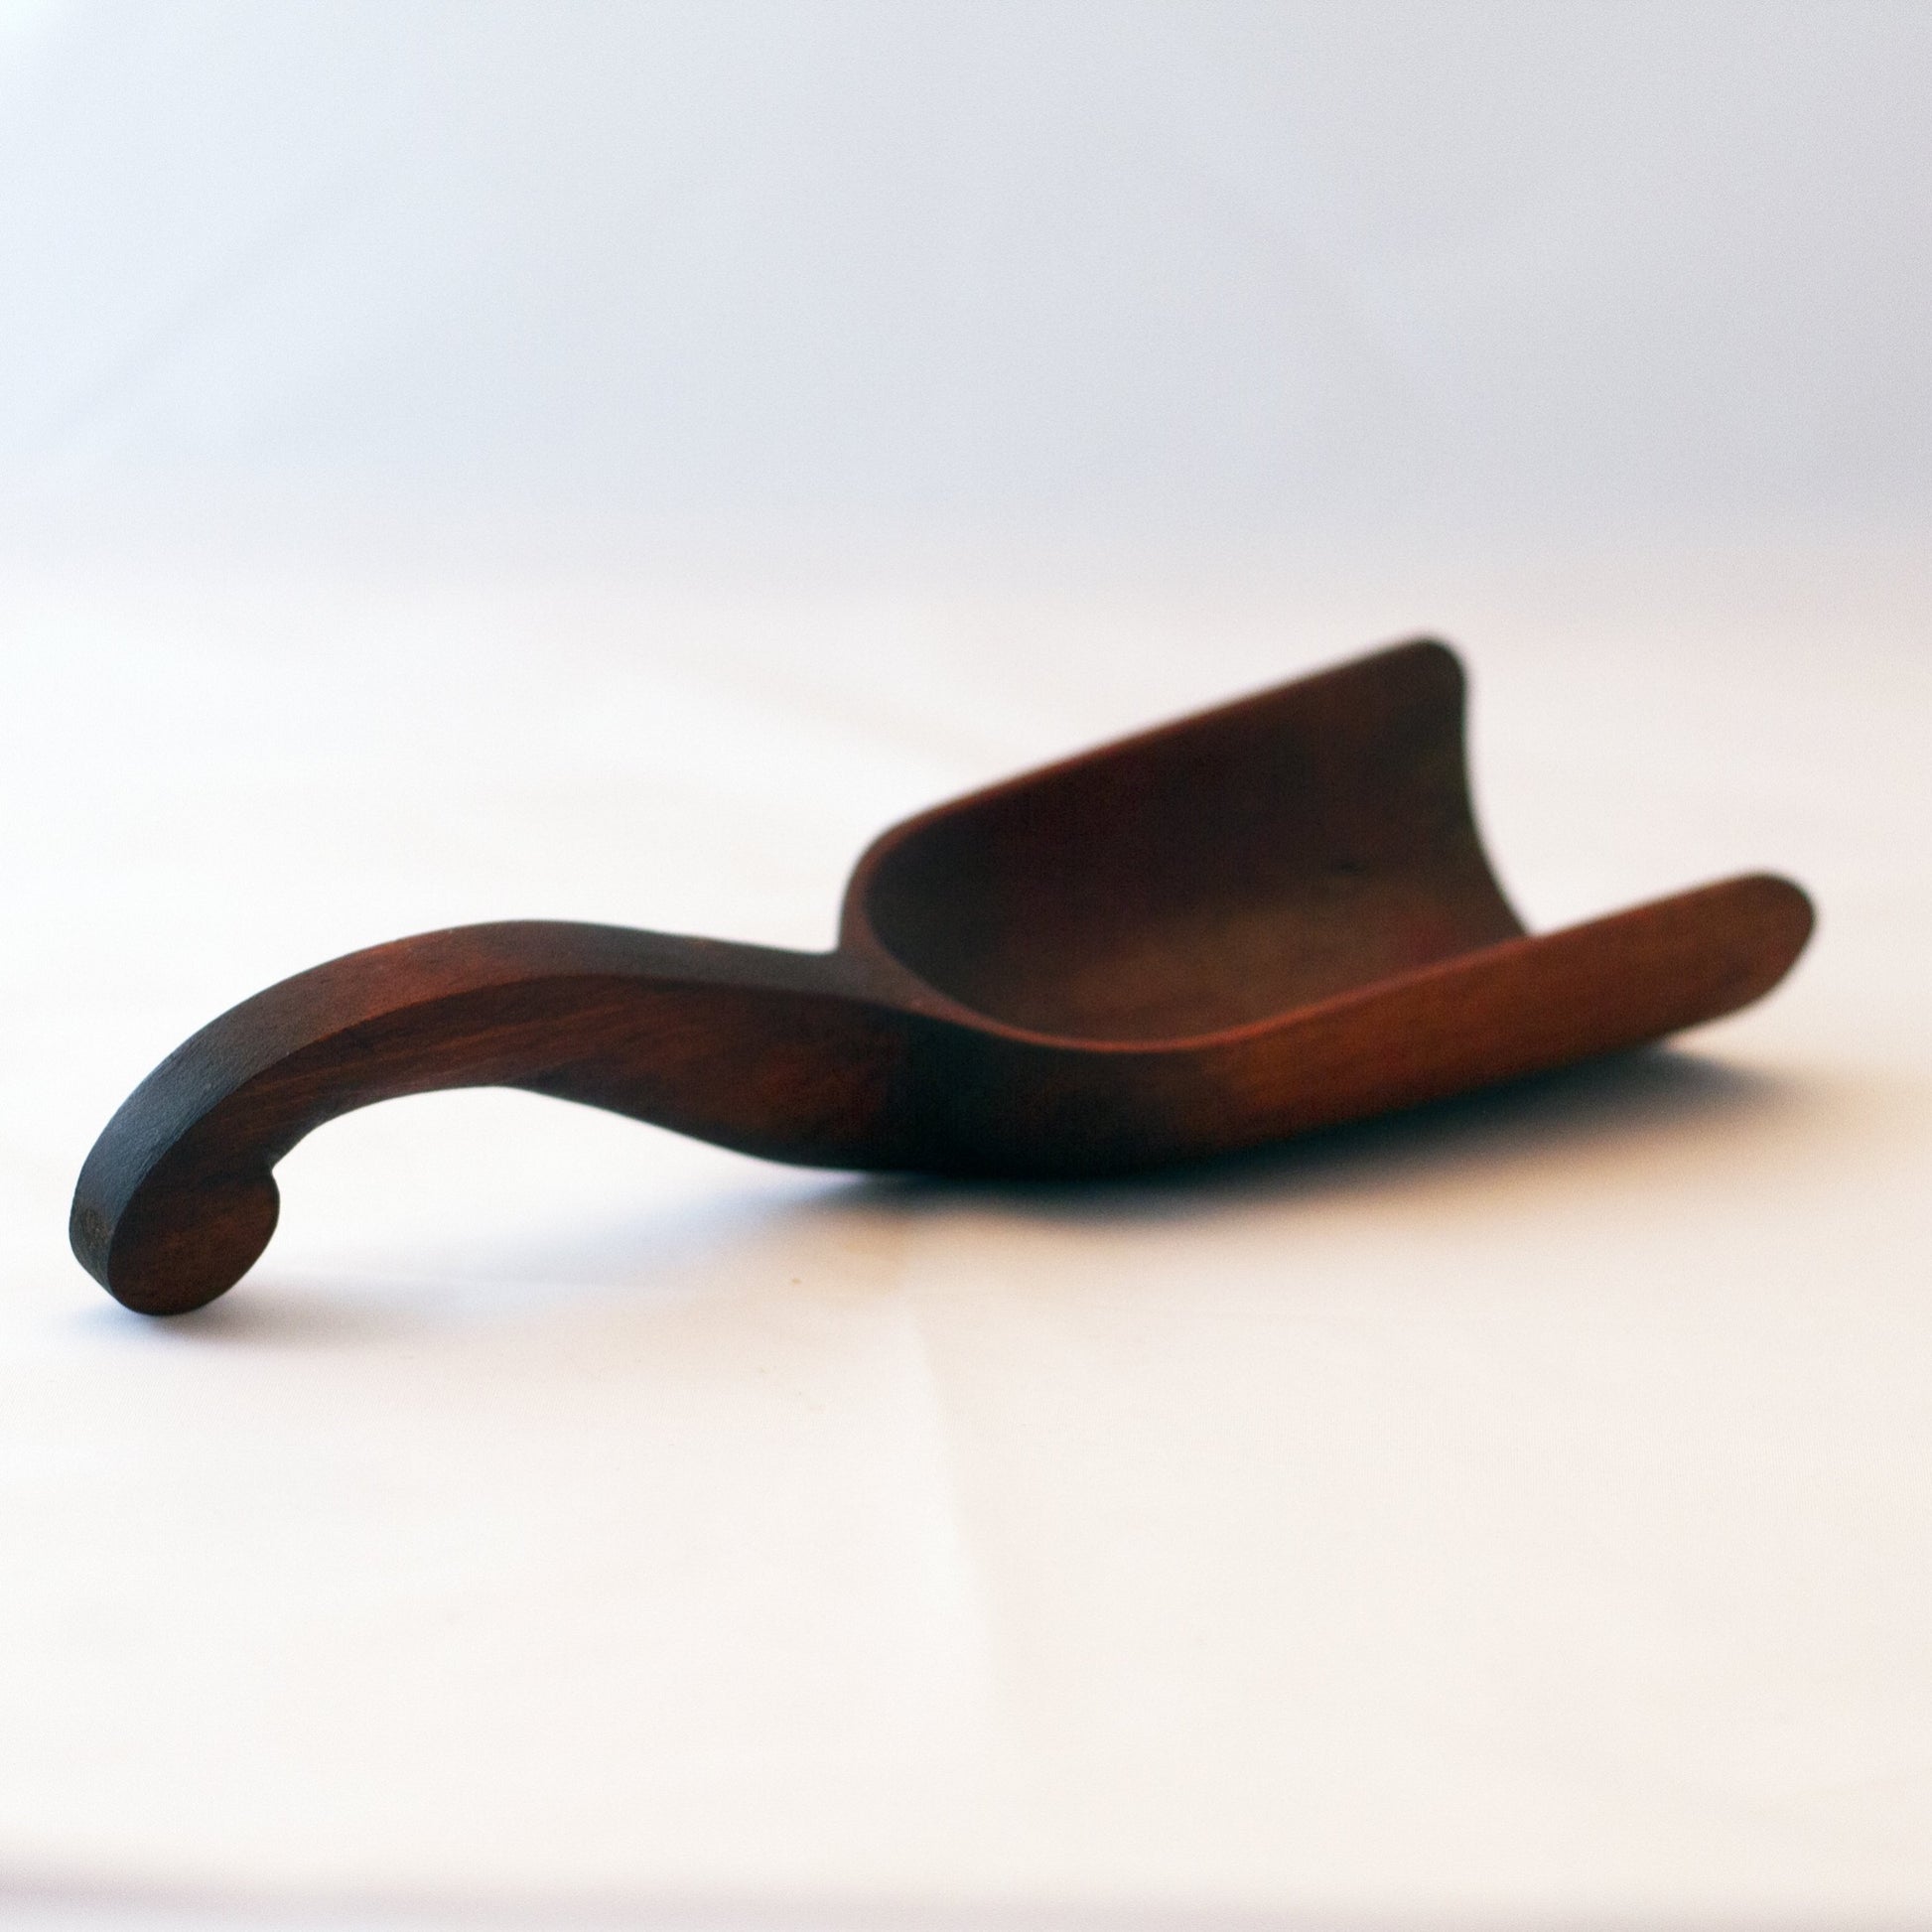 Williamsburg Style WOOD GRAIN SCOOP with Curved Handle